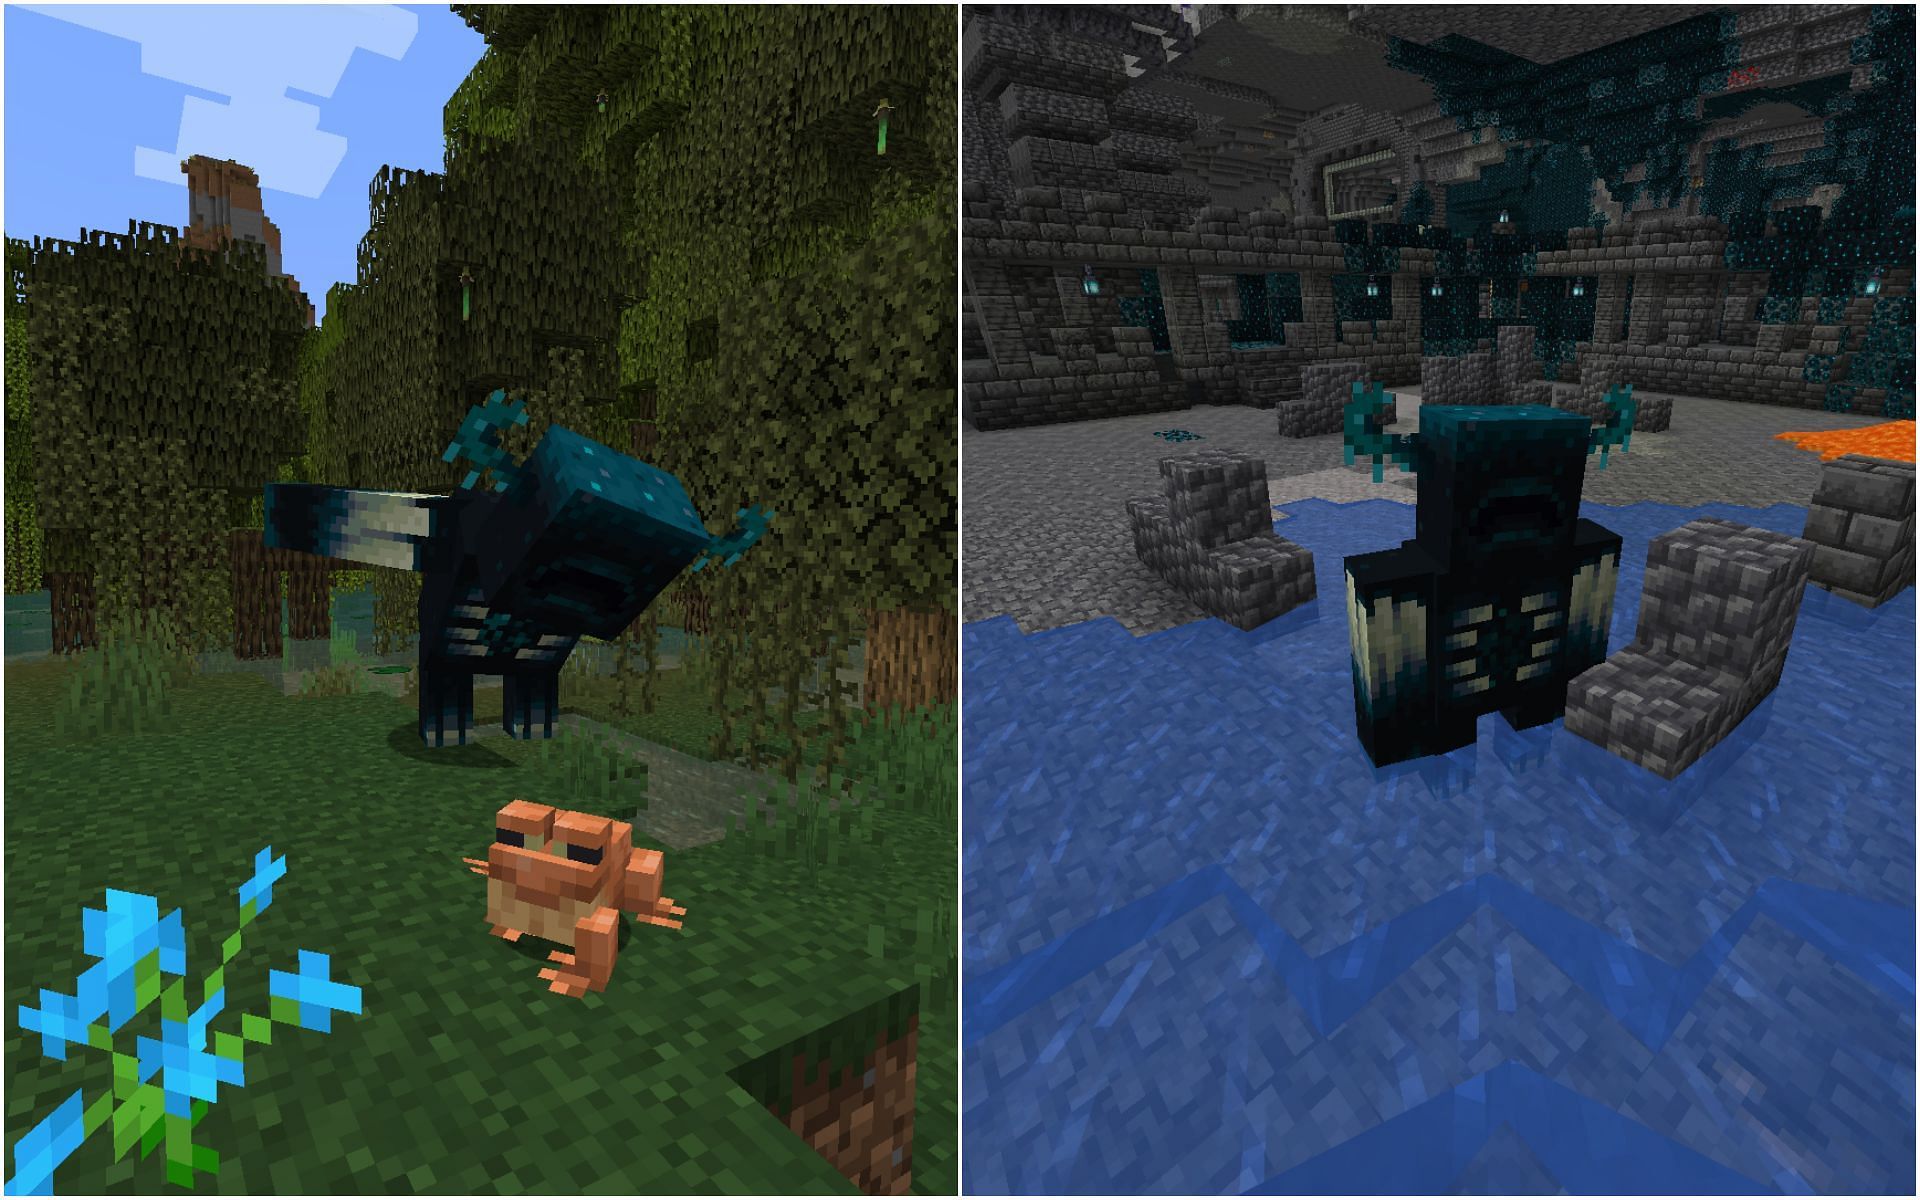 The mob gets angry at any other mob that bumps into it, but its speed slows down when in water (Image via Minecraft 1.19)